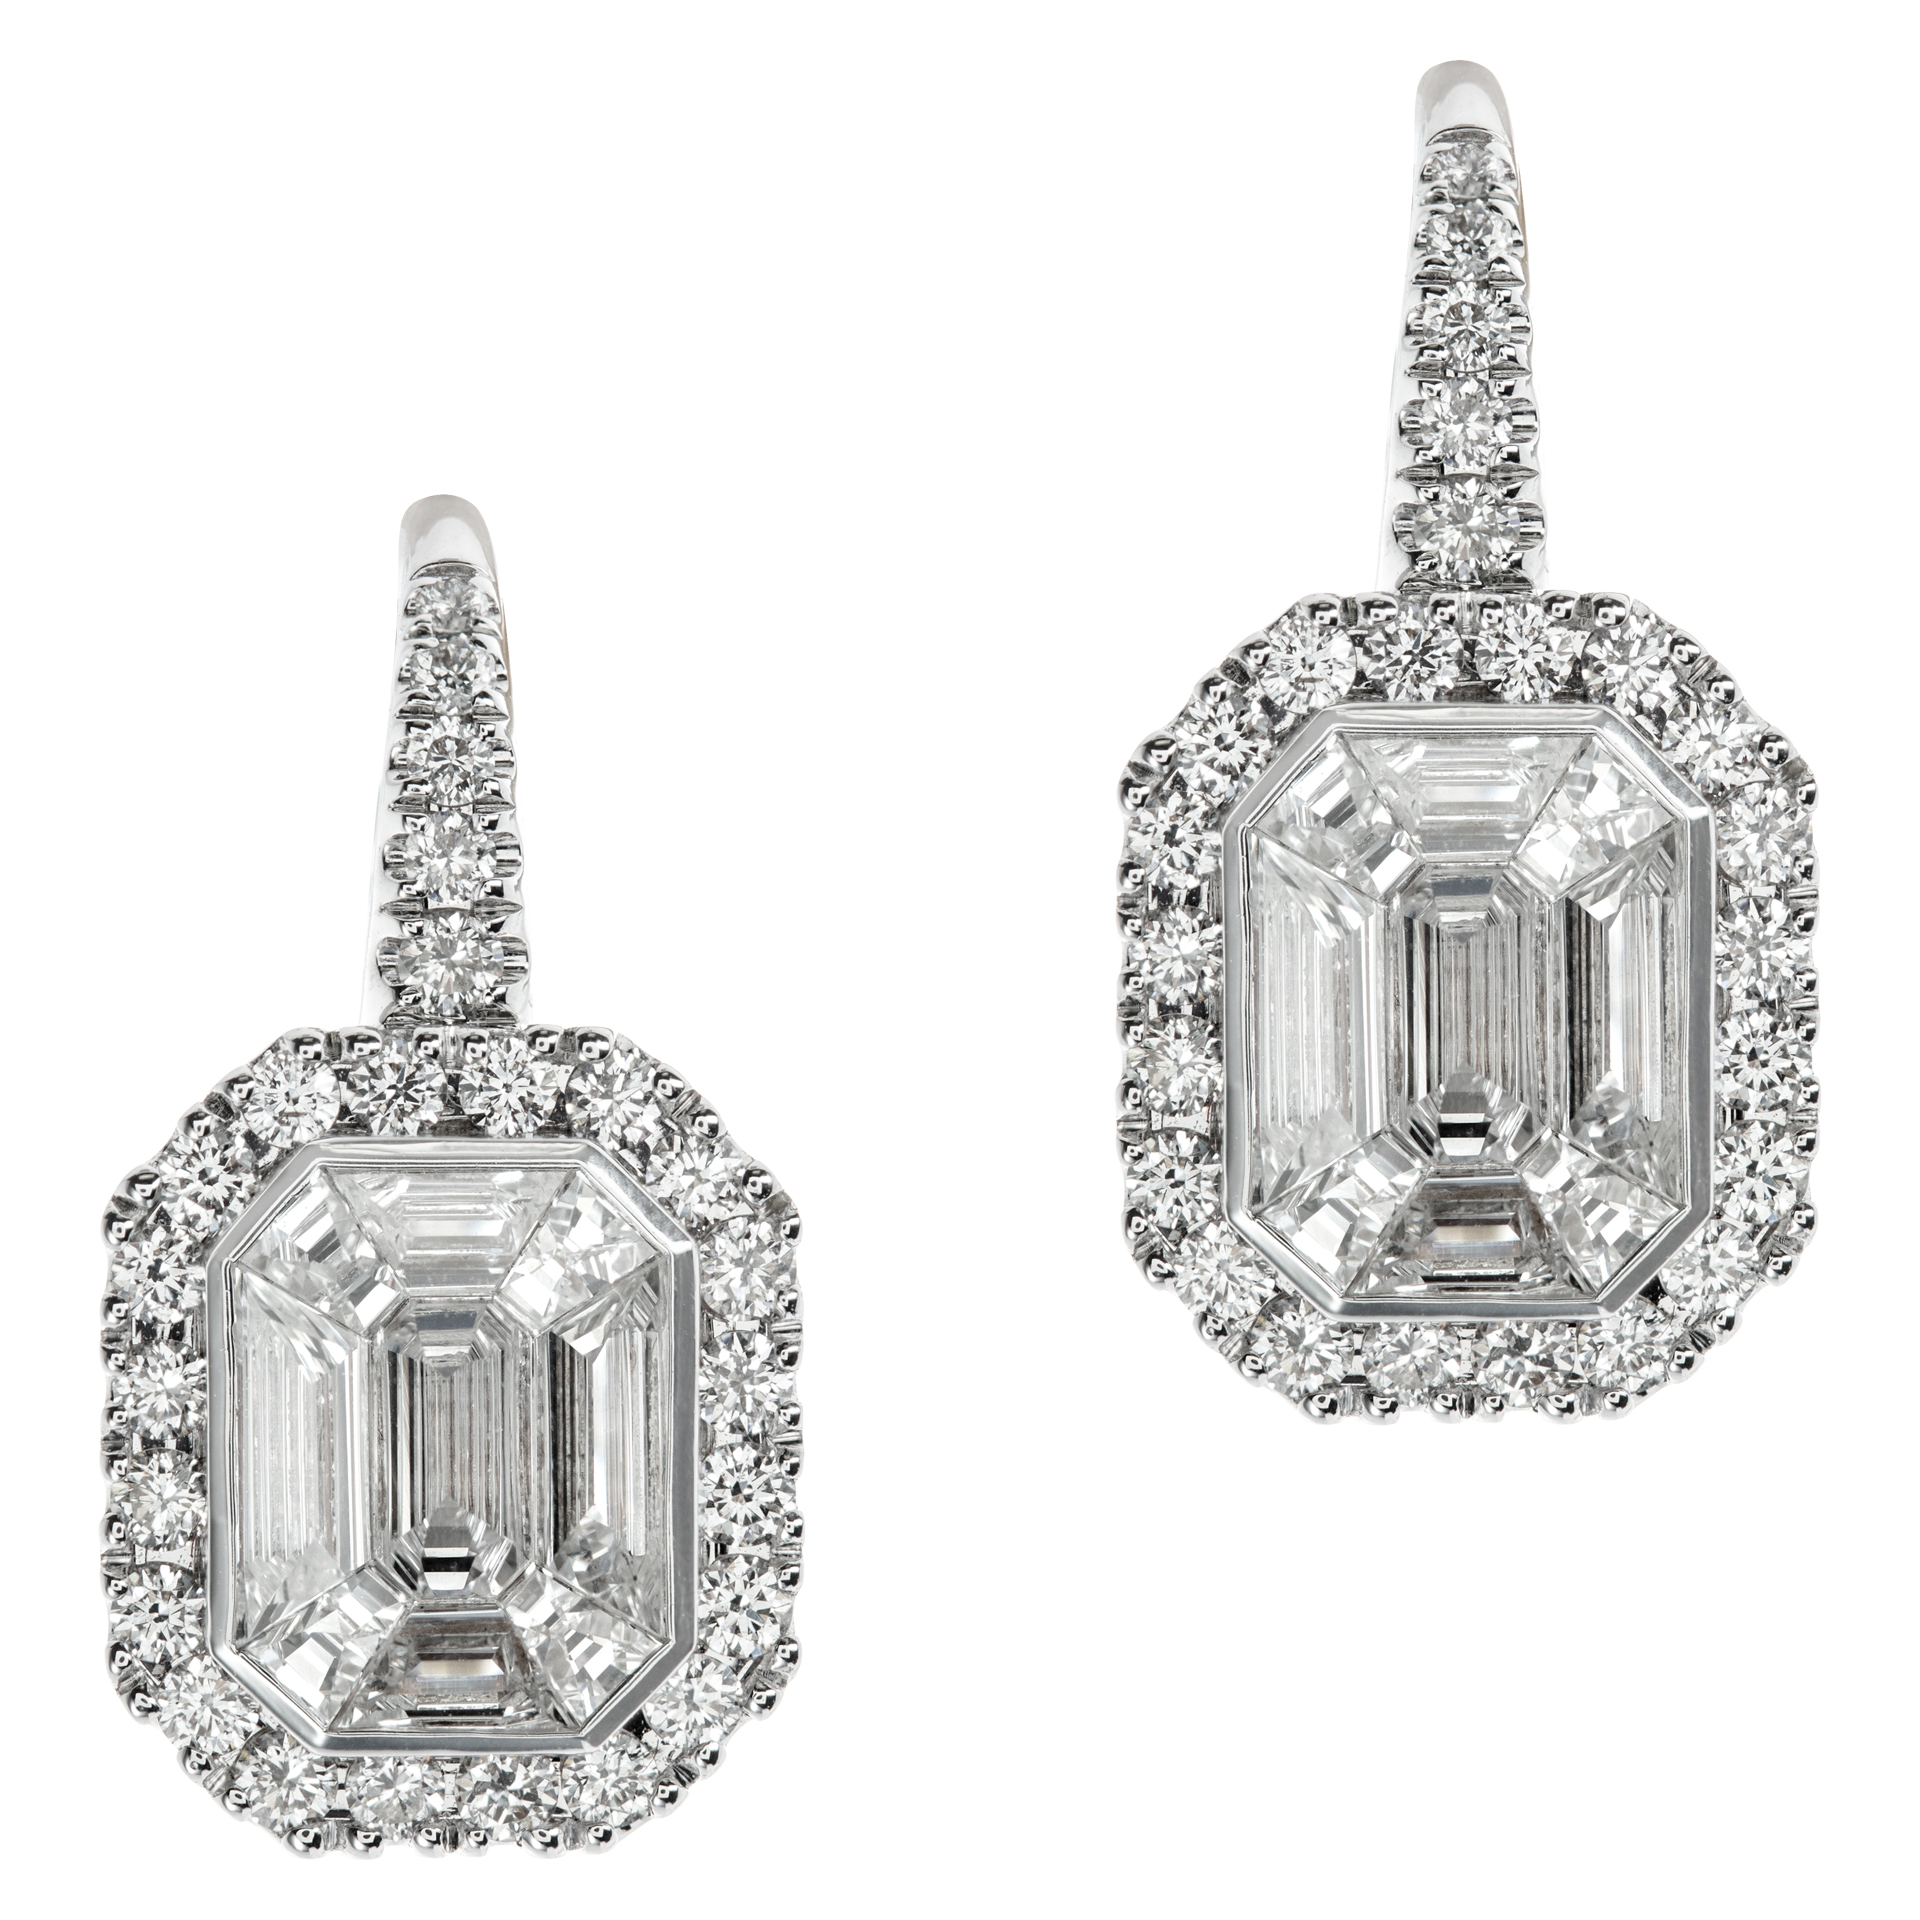 Illusion set diamond earrings in 18k white gold with 1.53 carats in diamonds (Stones)